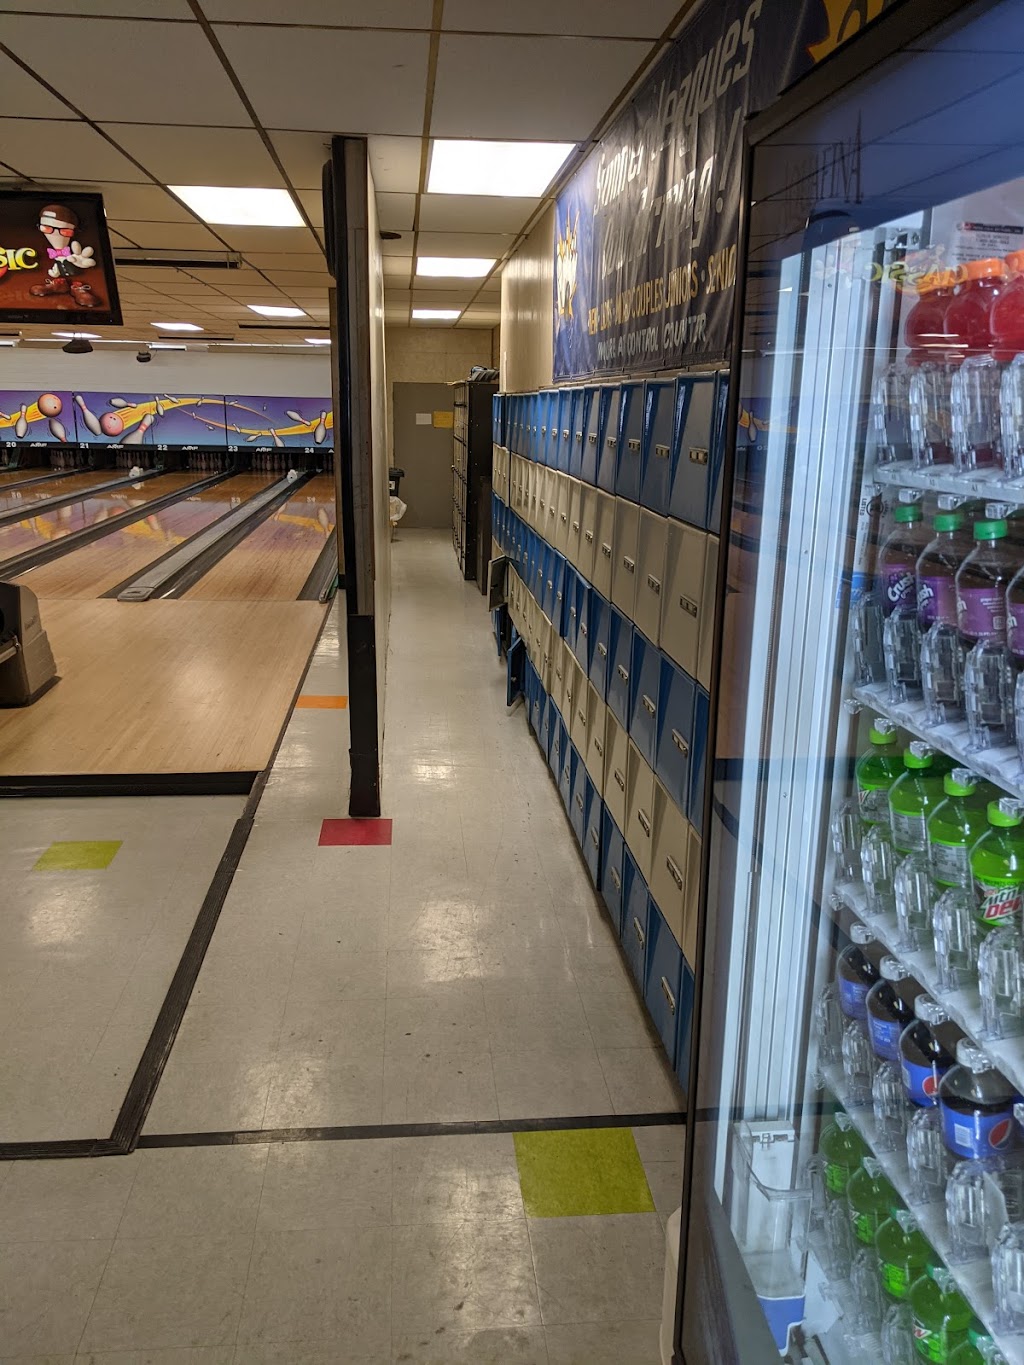 Gilmore Lanes | Photo 6 of 10 | Address: 5595 Dixie Hwy, Fairfield, OH 45014, USA | Phone: (513) 874-3838